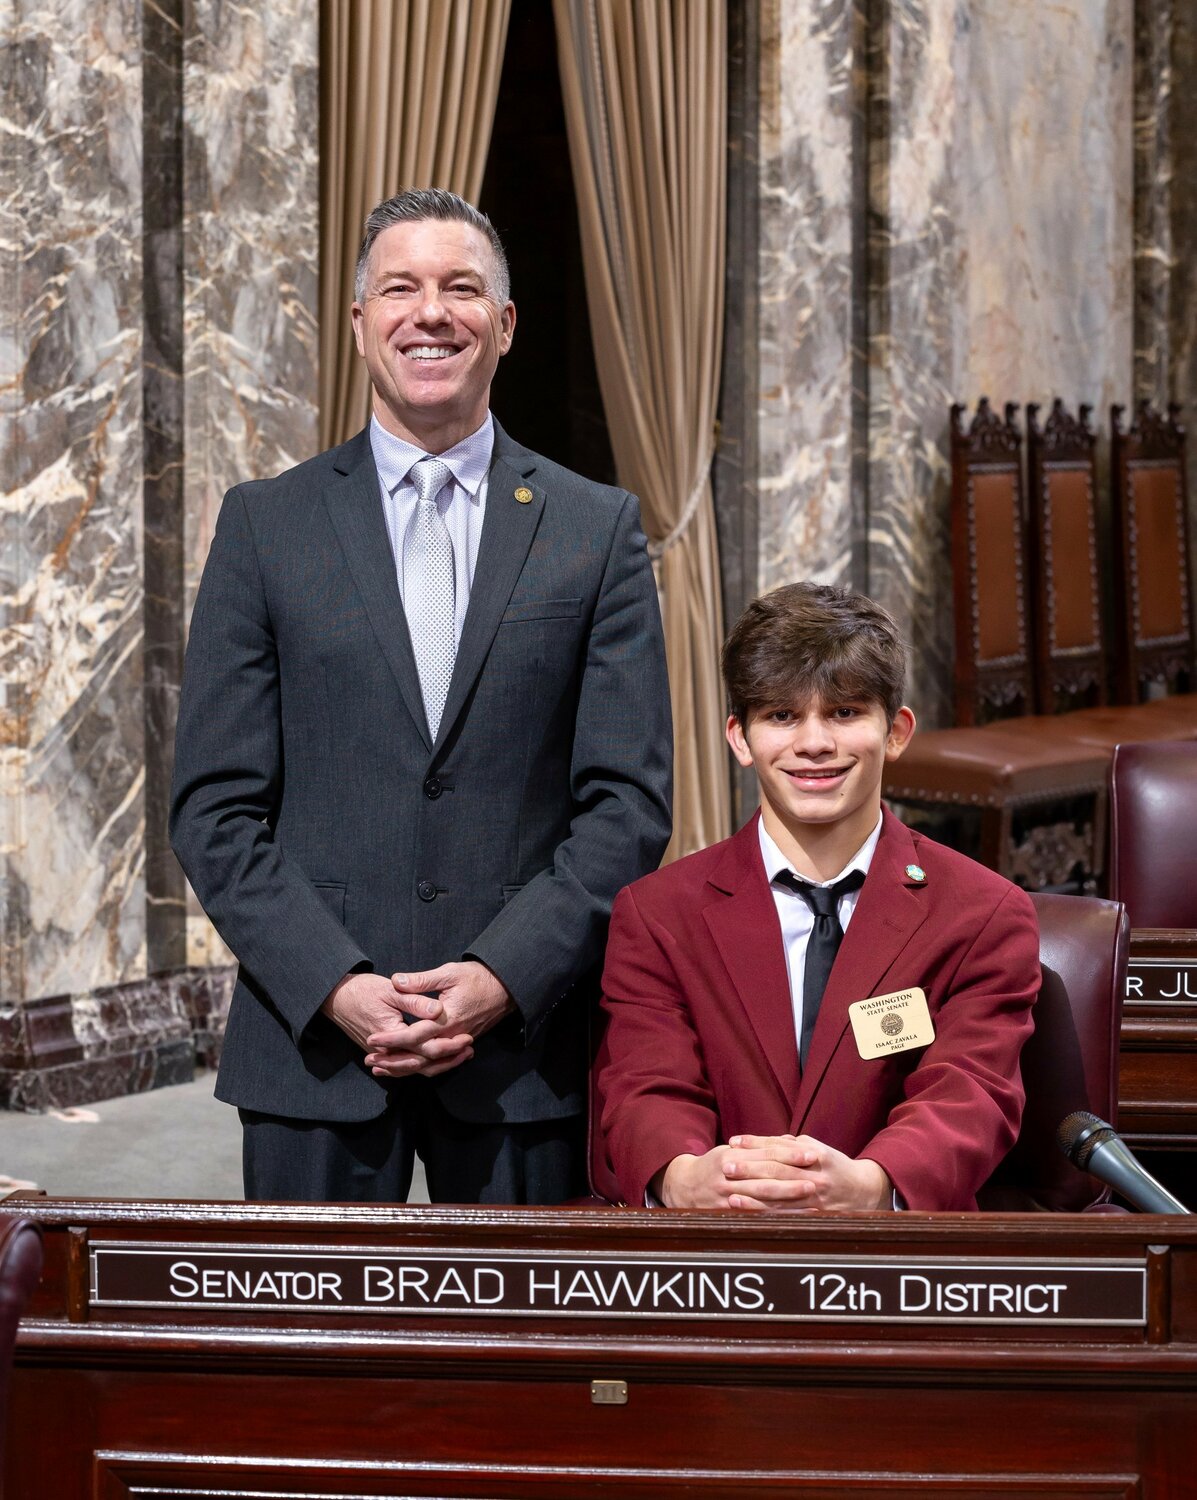 Cashmere High School sophomore Isaac Zavala (sitting) with 12th Legislative District Senator Brad Hawkins at the Capitol in Olympia, where Zavala served as a Senate page during the fourth week of the 2024 Legislative session. Isaac, who was sponsored by Senator Hawkins, gained firsthand experience in the legislative process, participating in floor voting and learning about parliamentary procedures.